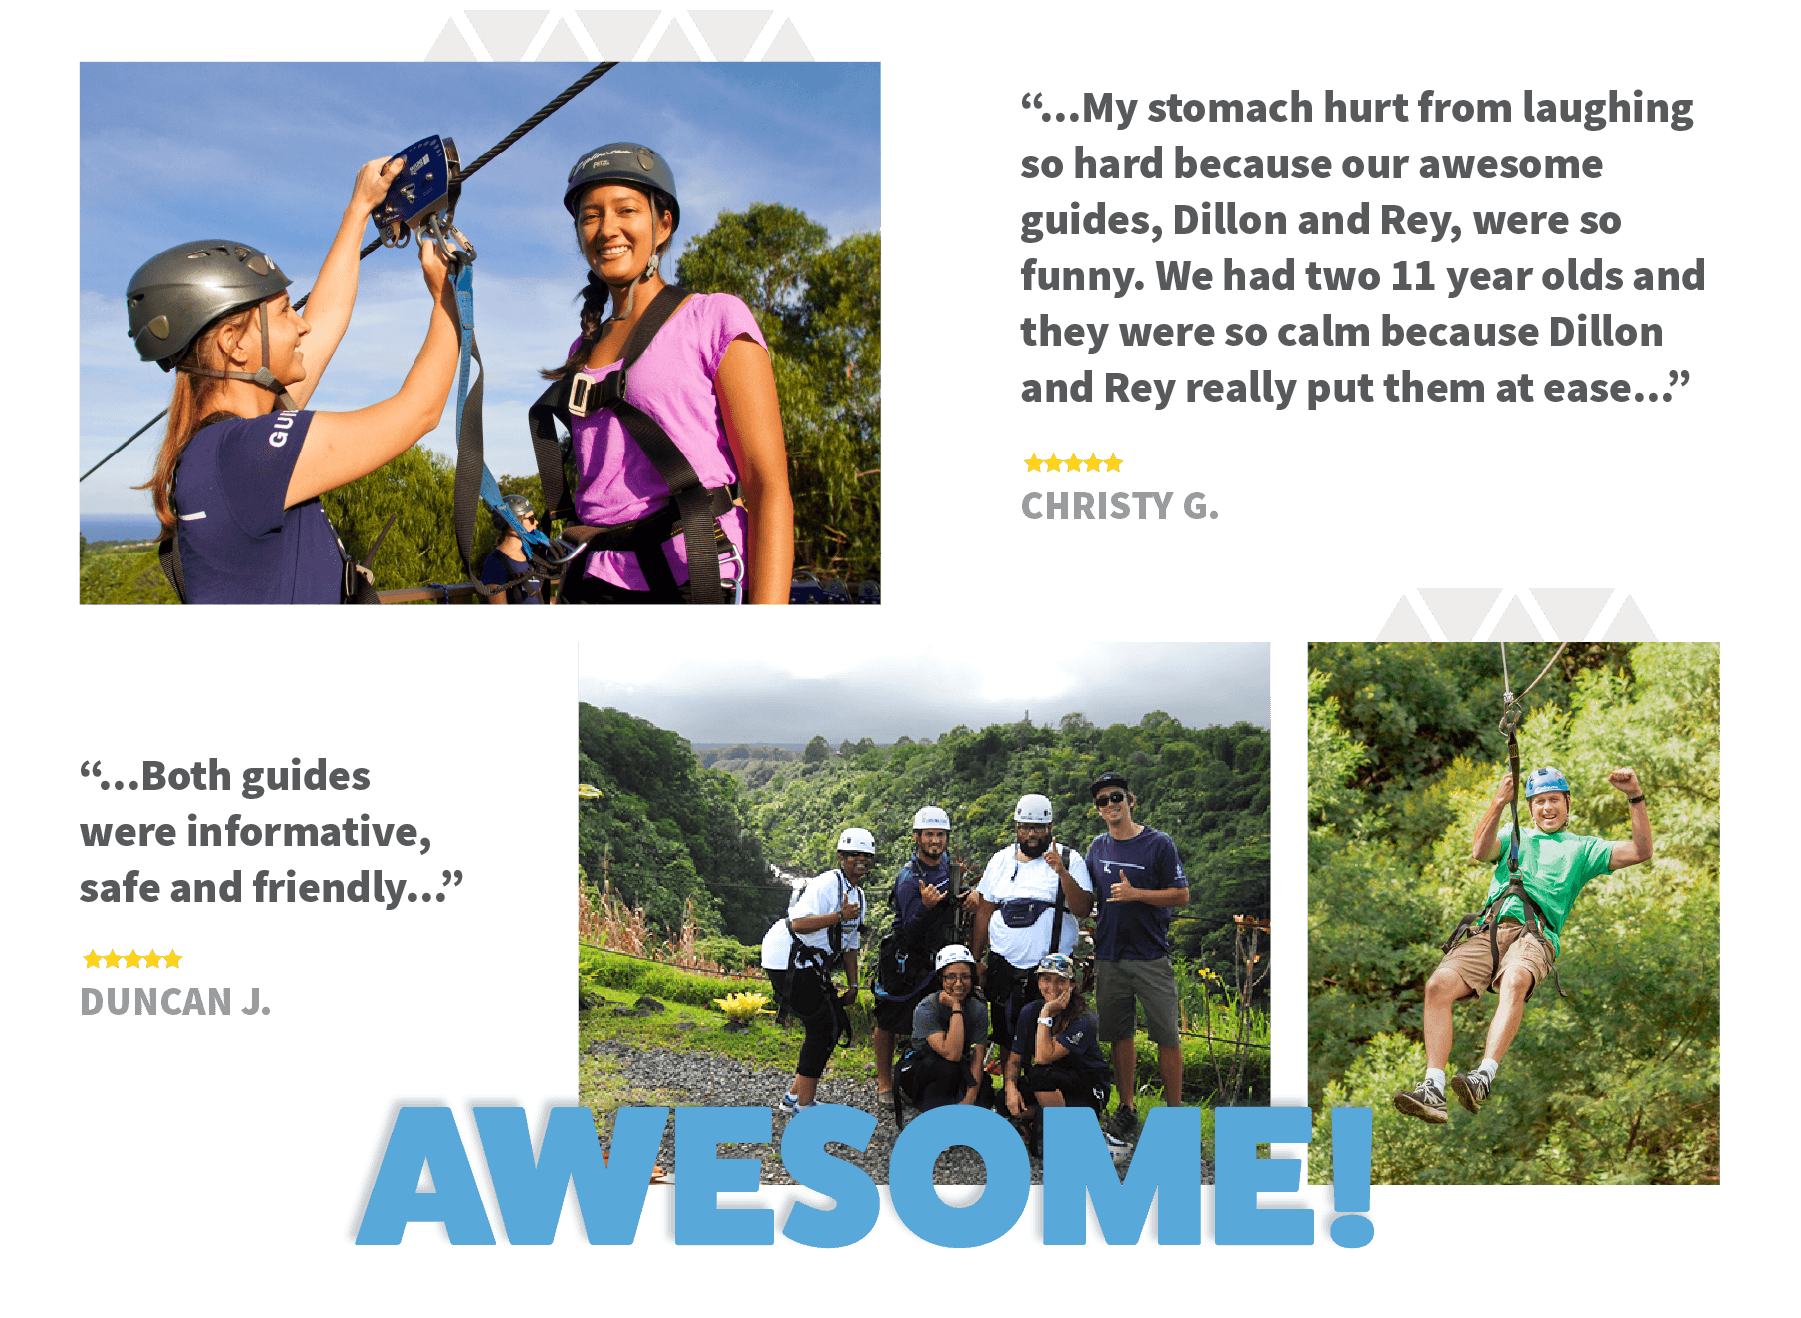 Our zipline guides are awesome